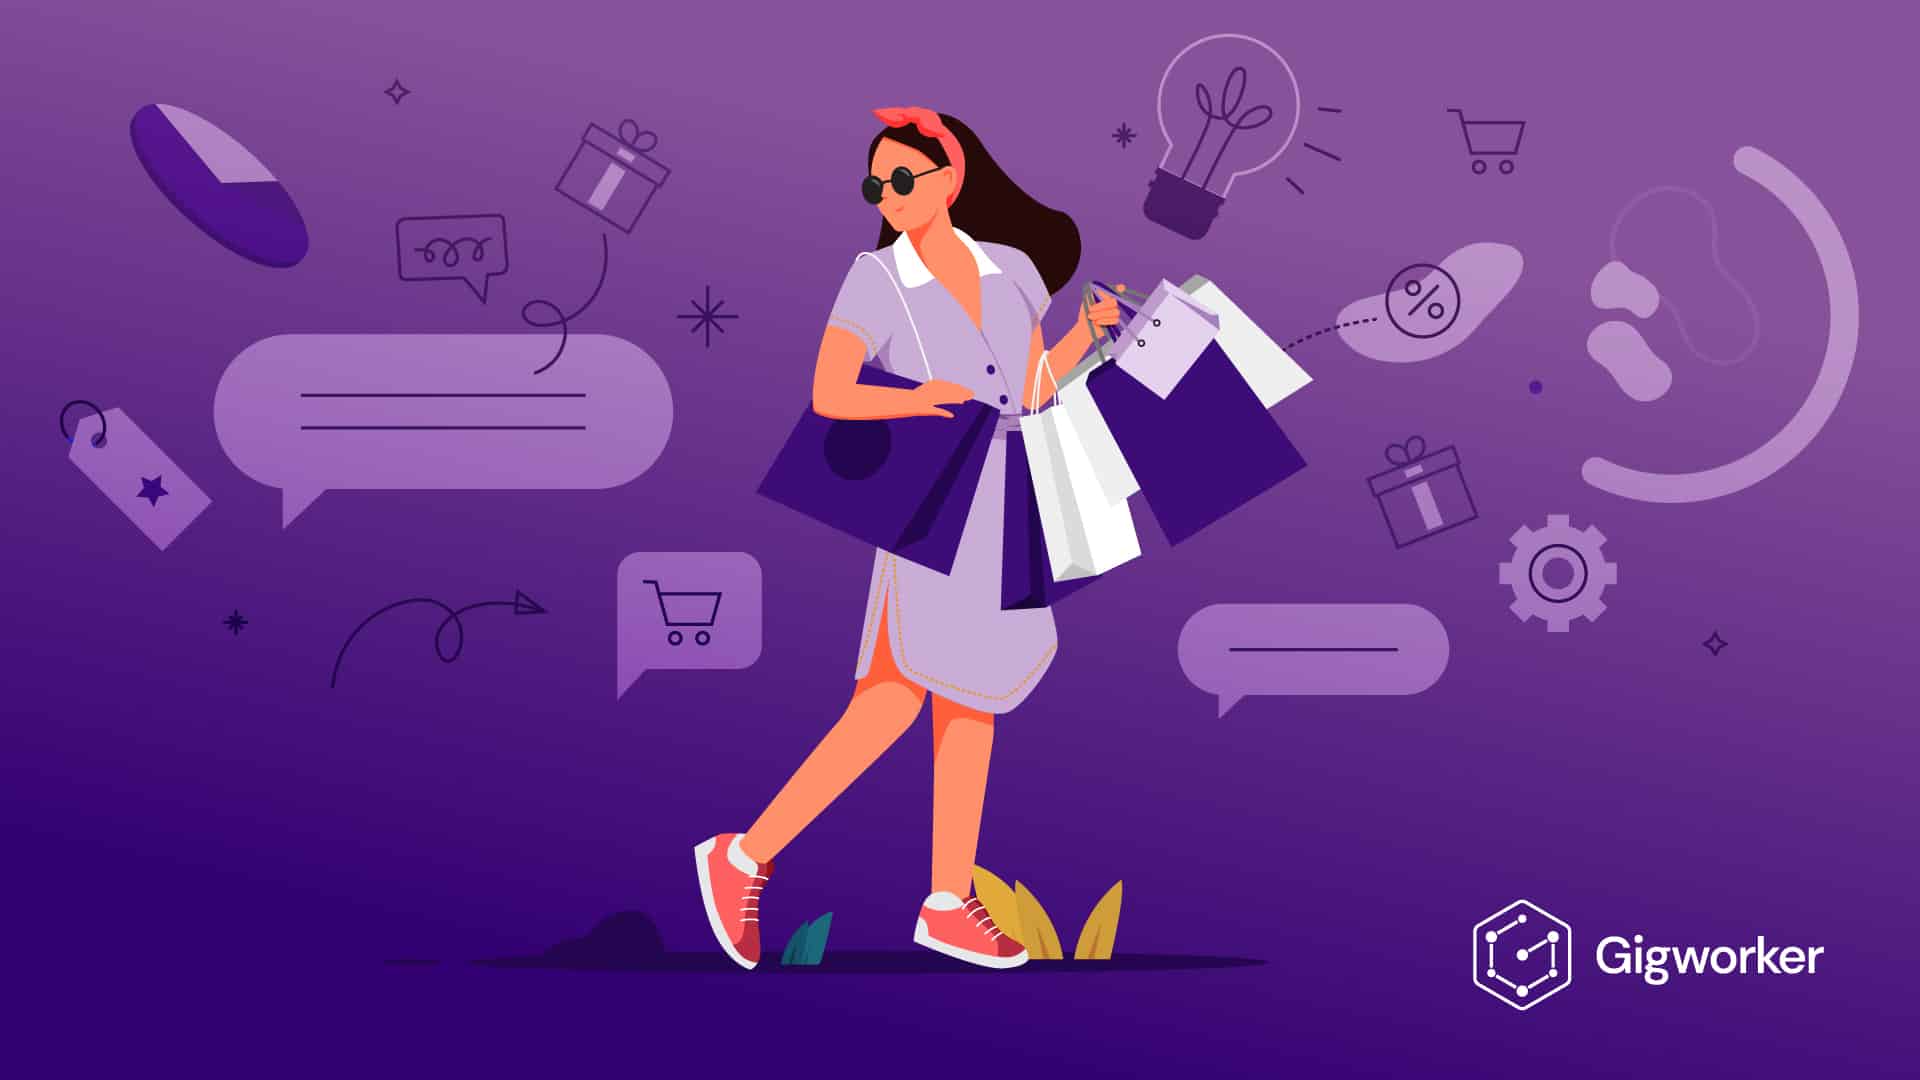 vector graphic showing an illustration of a woman carrying shopping bags to show how to become a secret shopper